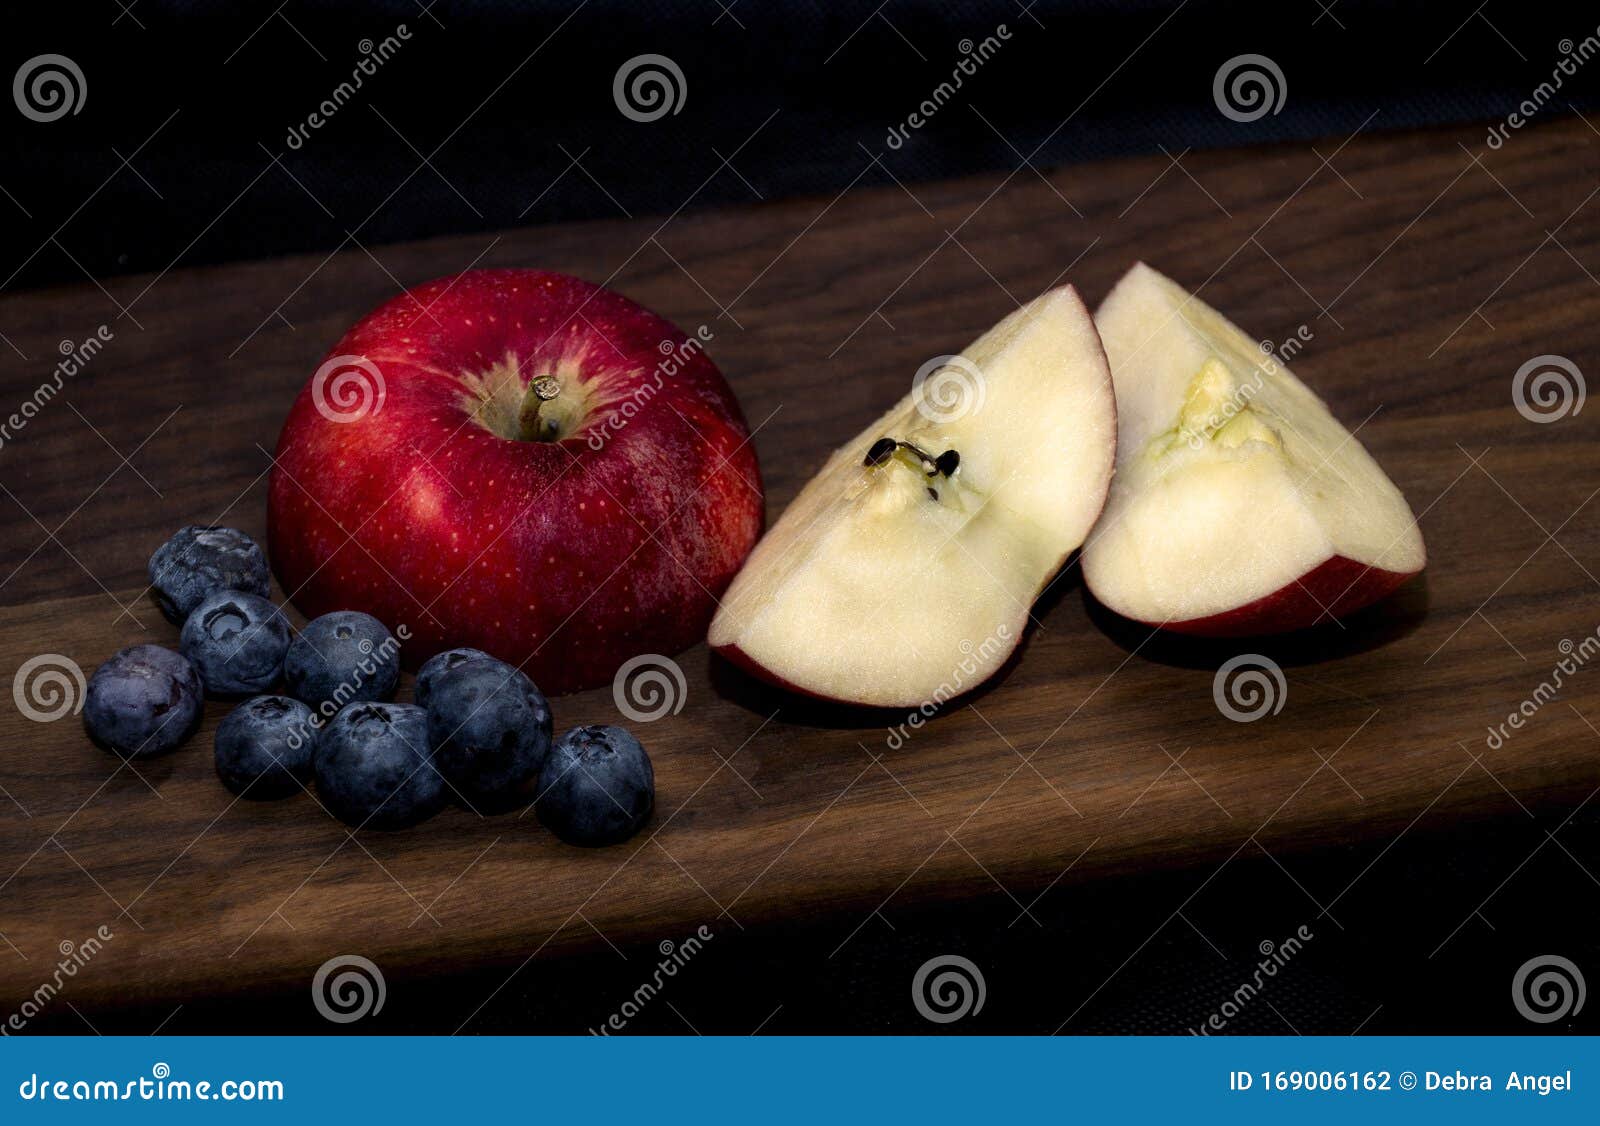 fresh apples and  blue berries